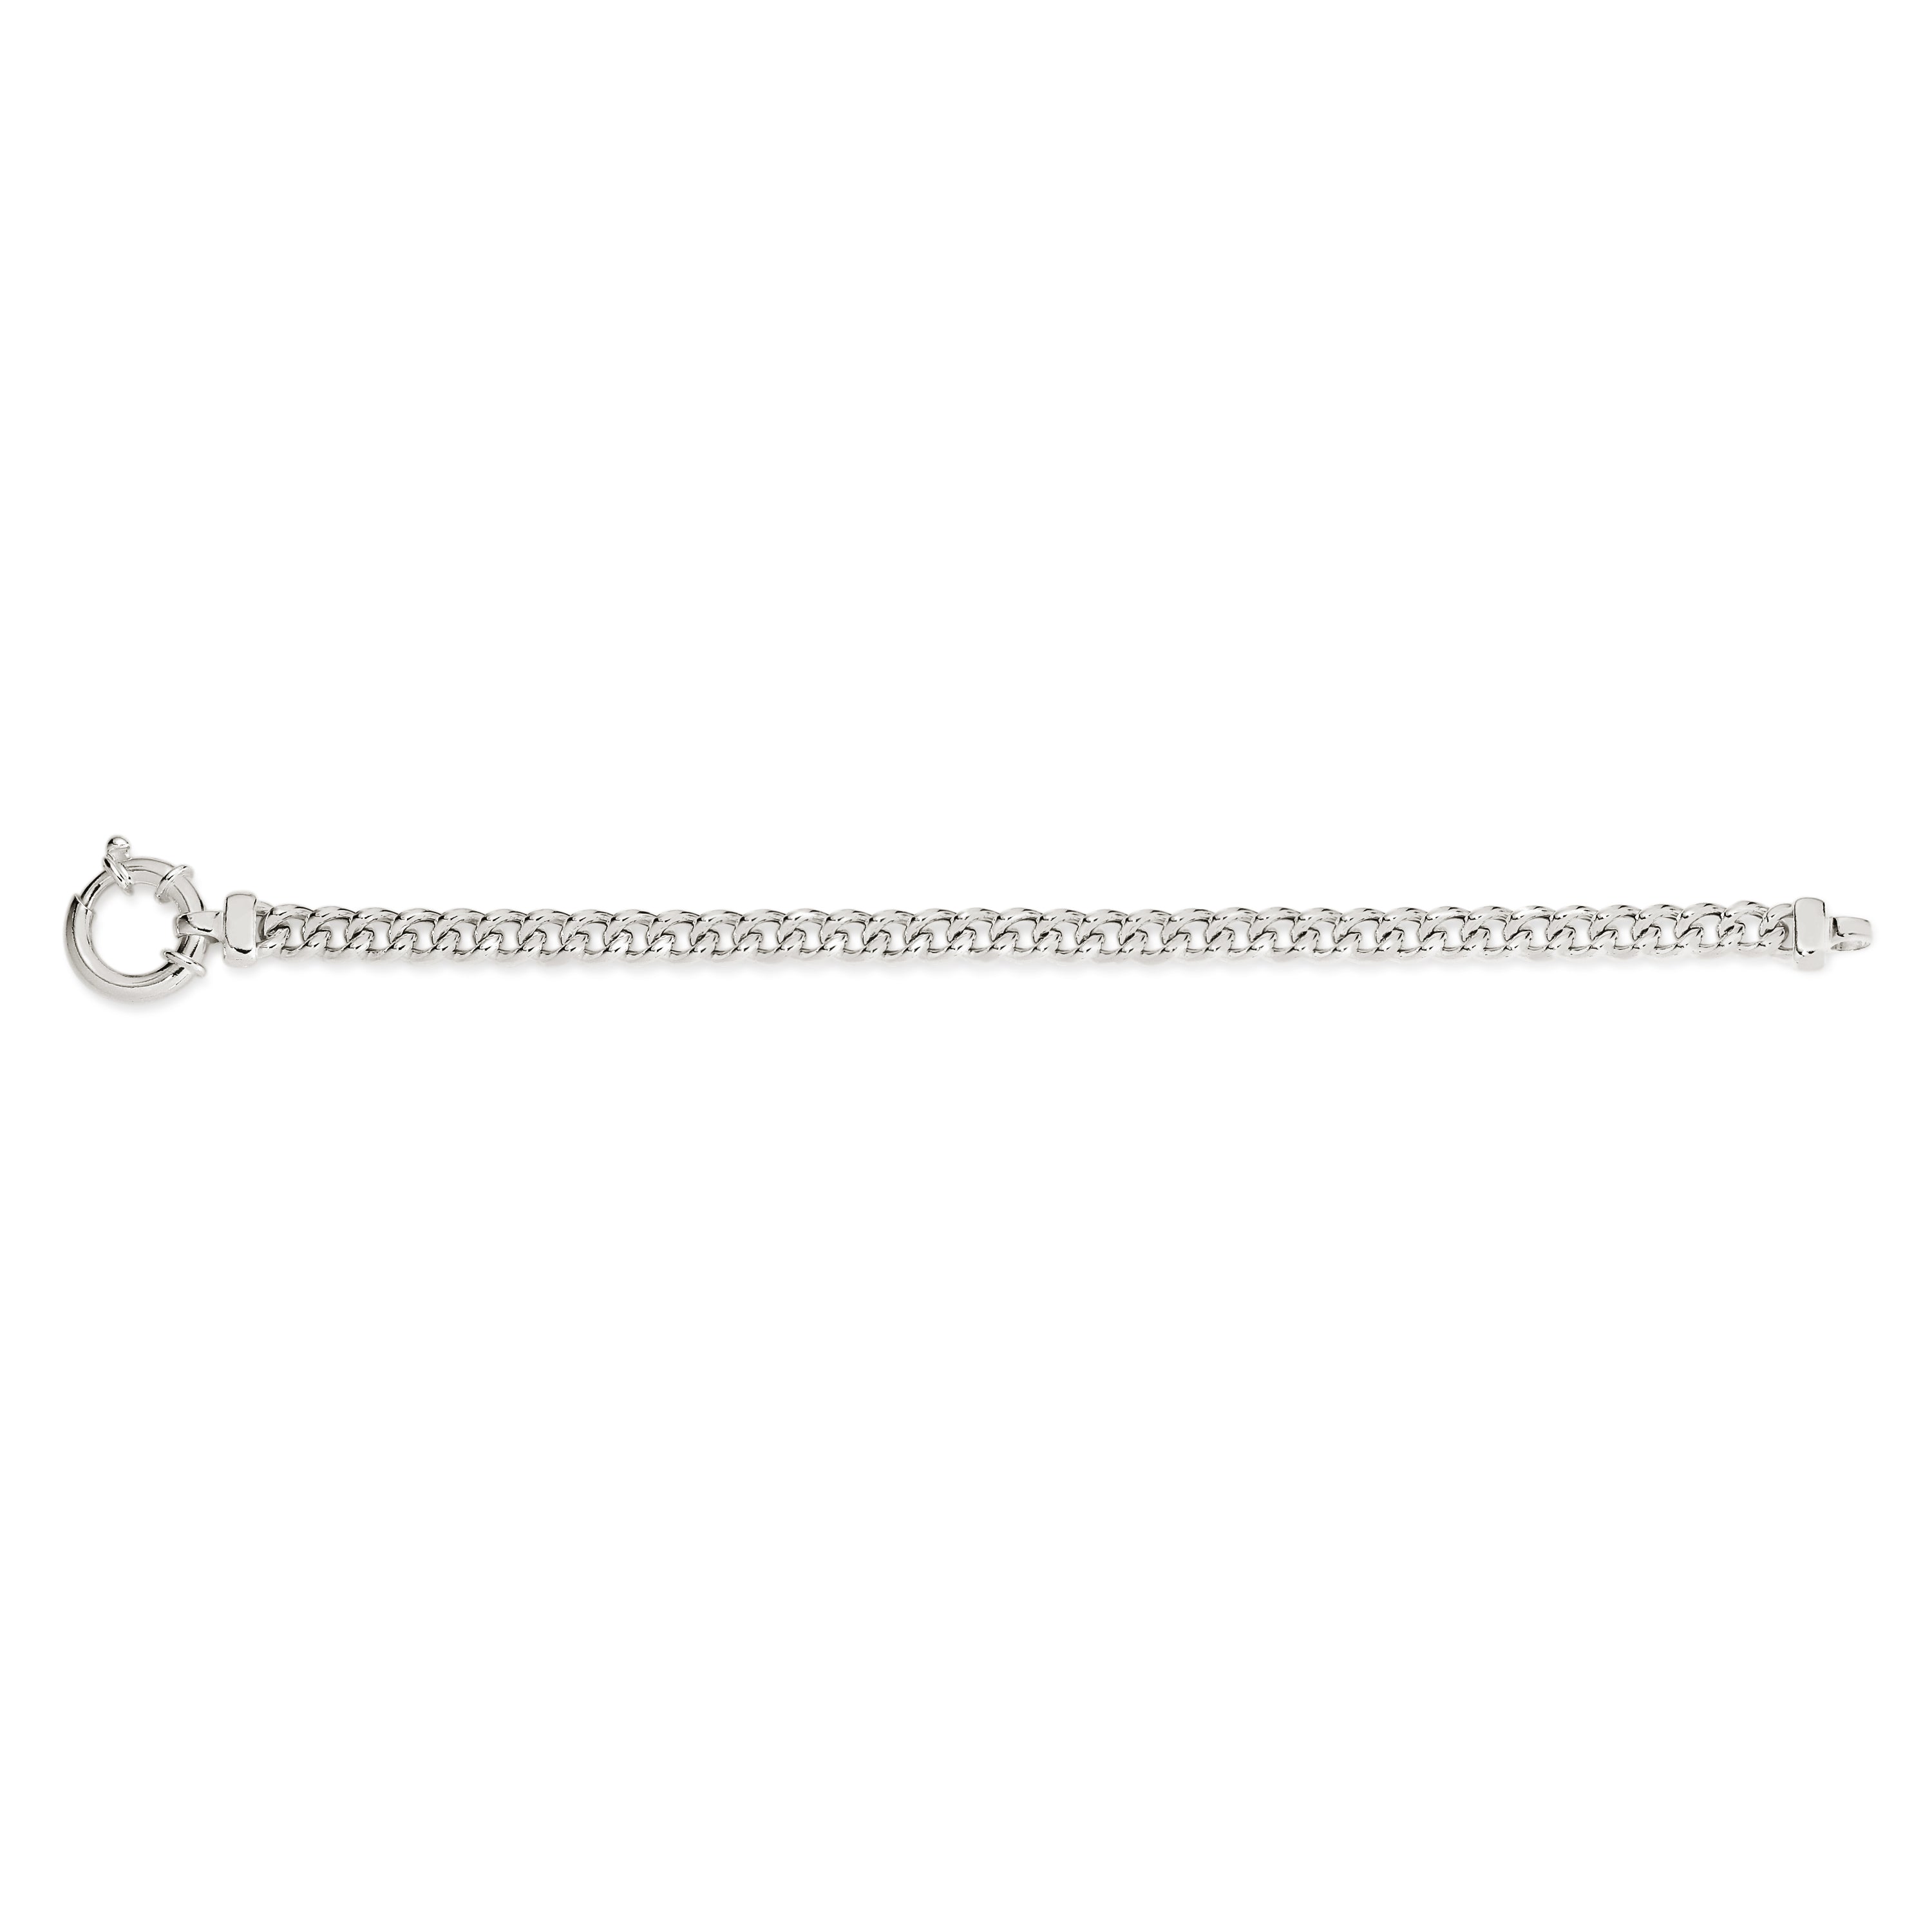 Curb Sterling Silver Bracelet WIth Bolt RIng 20cm